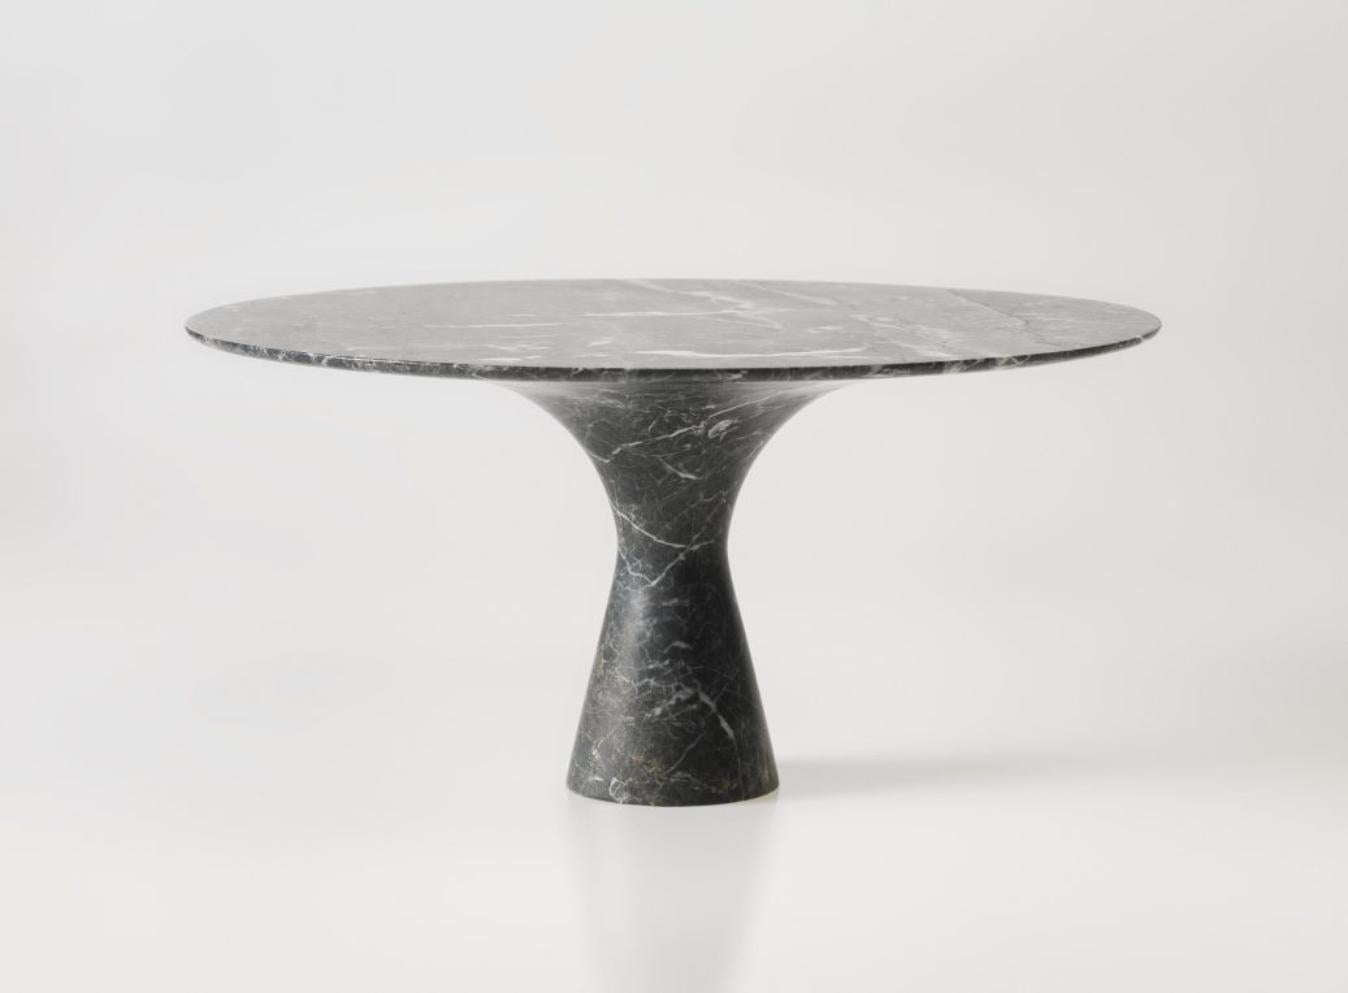 Grey Saint Laurent Refined Contemporary Marble Low Round Table 36/100 For Sale 2